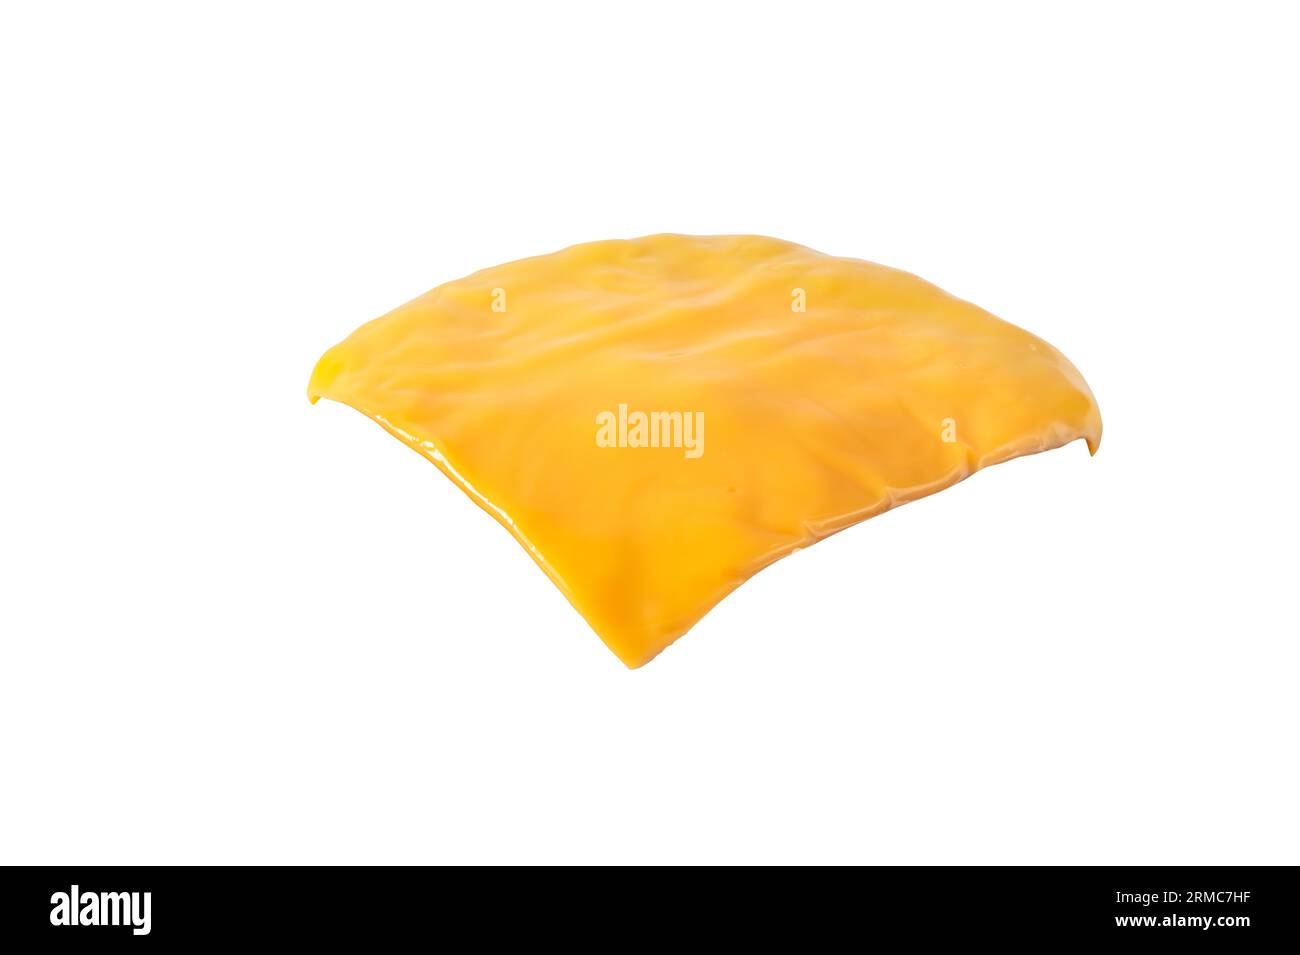 Slice of melted cheese for sandwich isolated on white. Cheddar cheese hamburger ingredient. Stock Photo